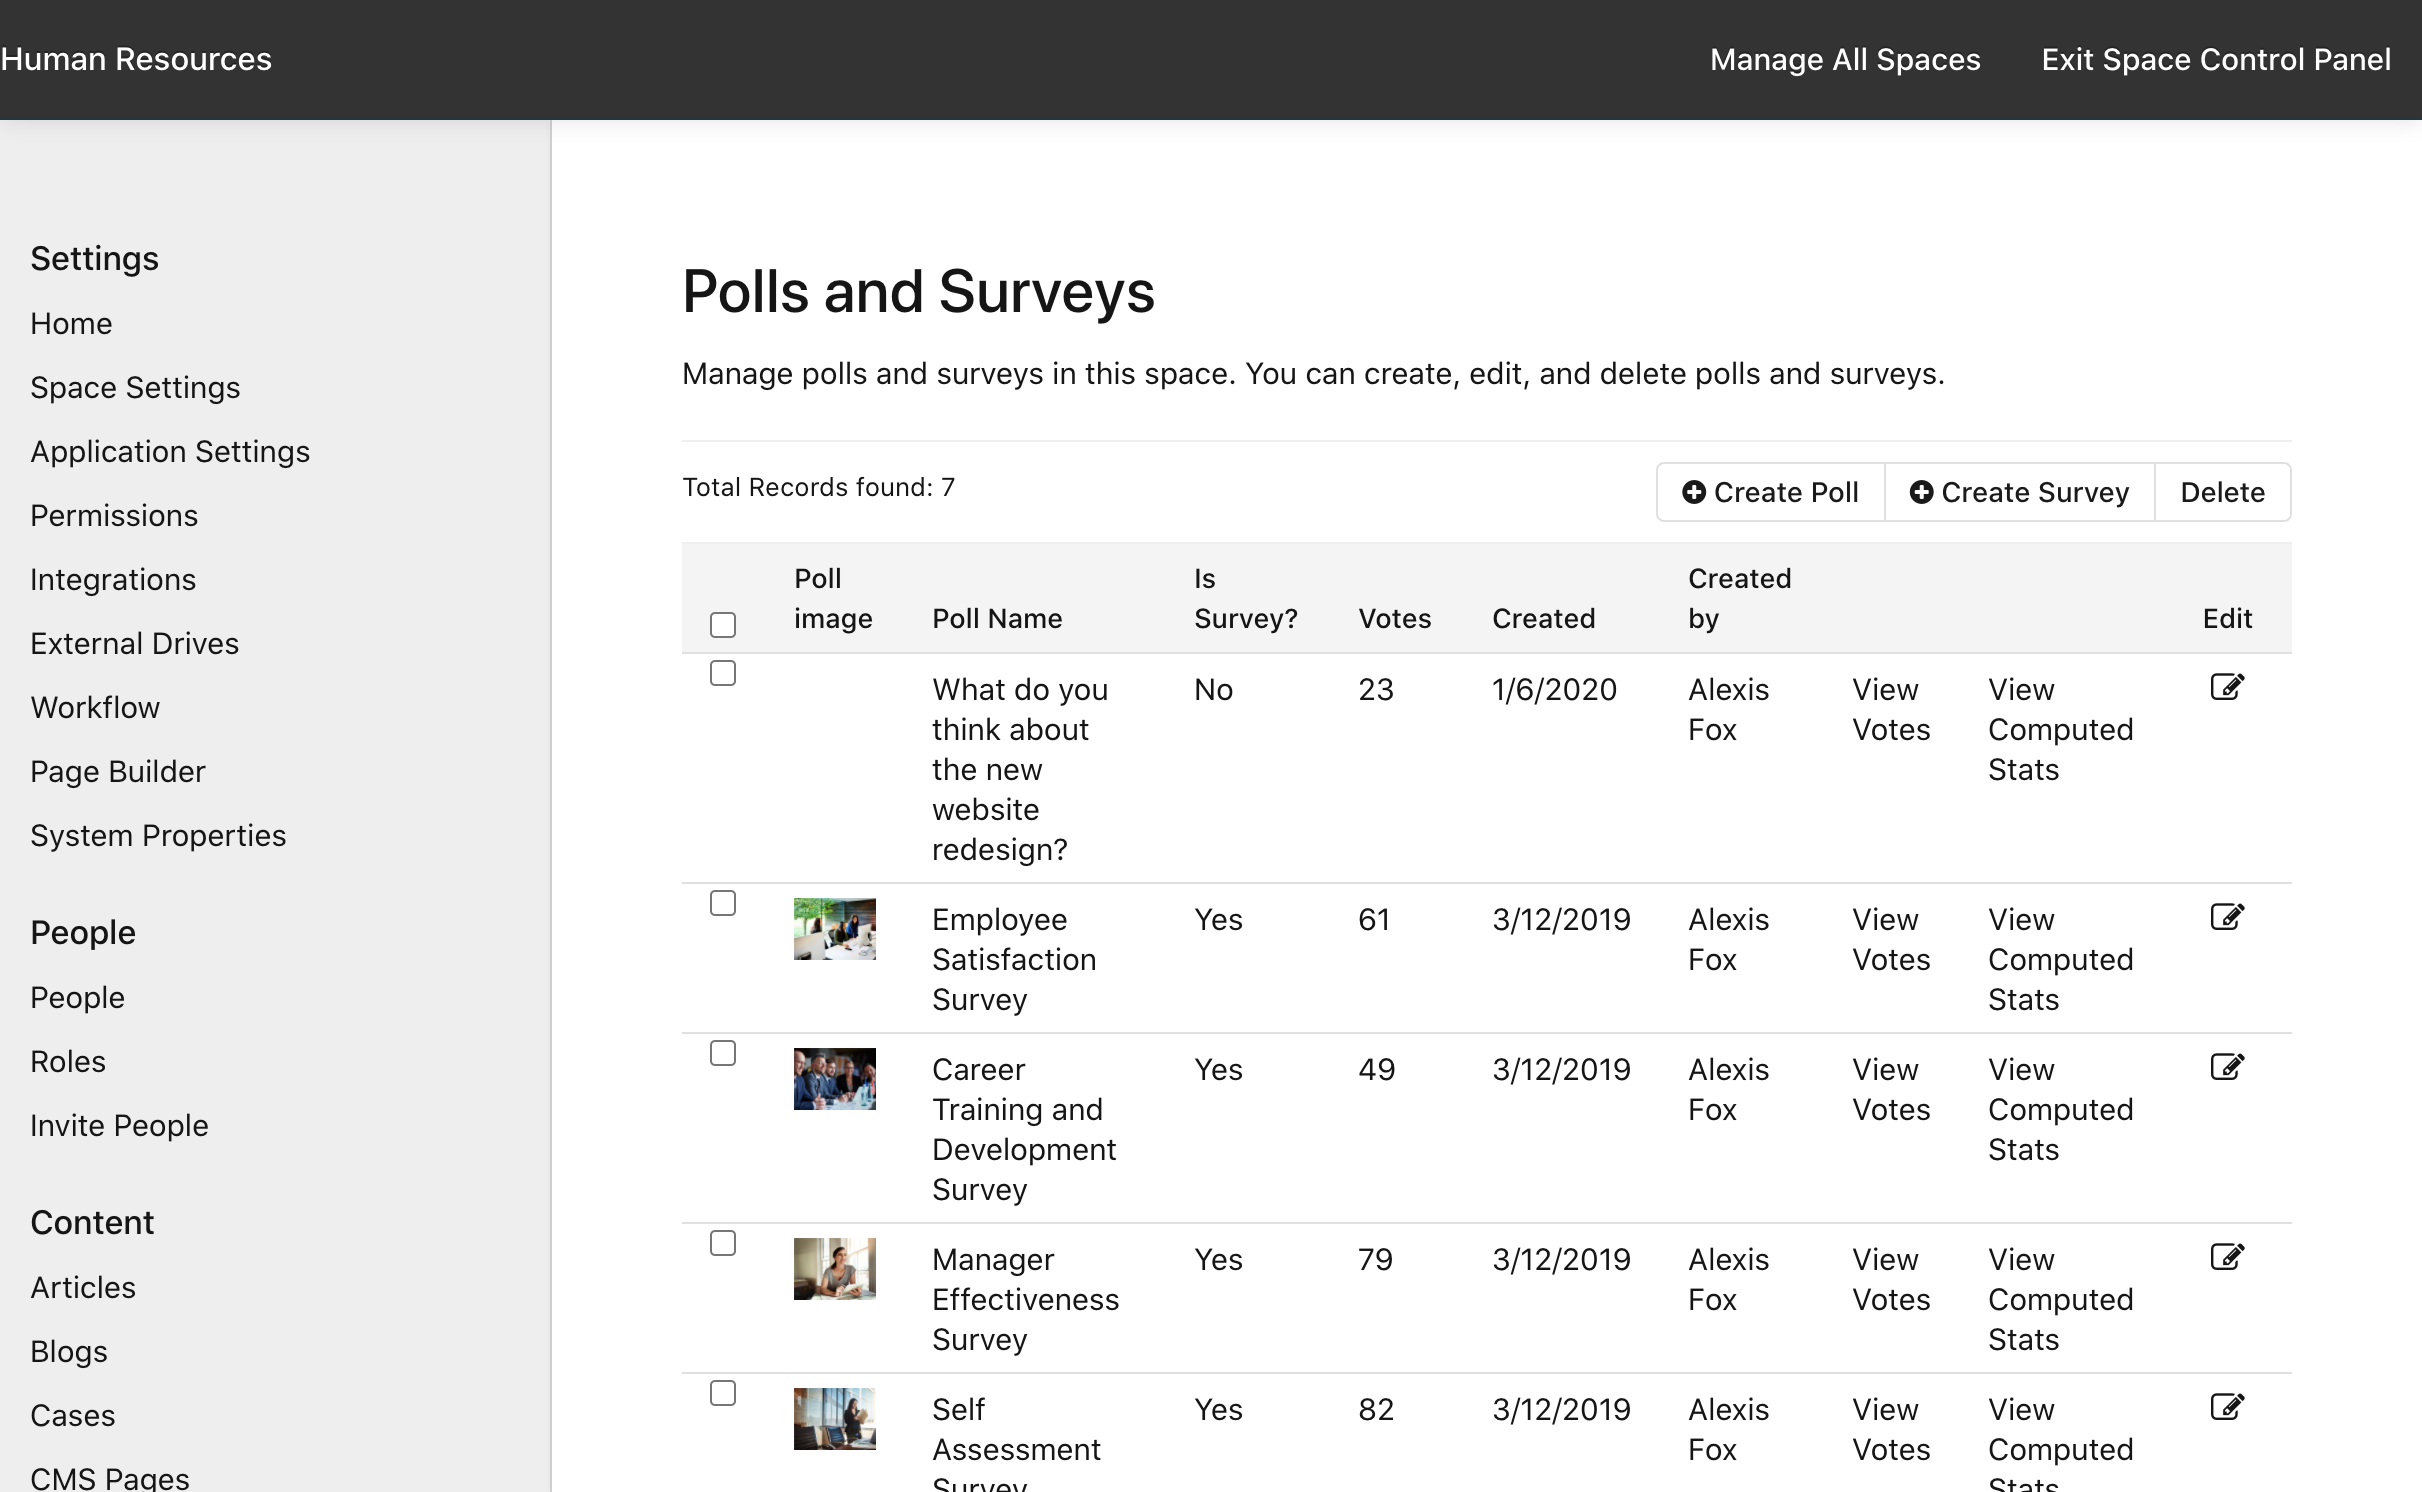 Manage Space: Polls and Surveys